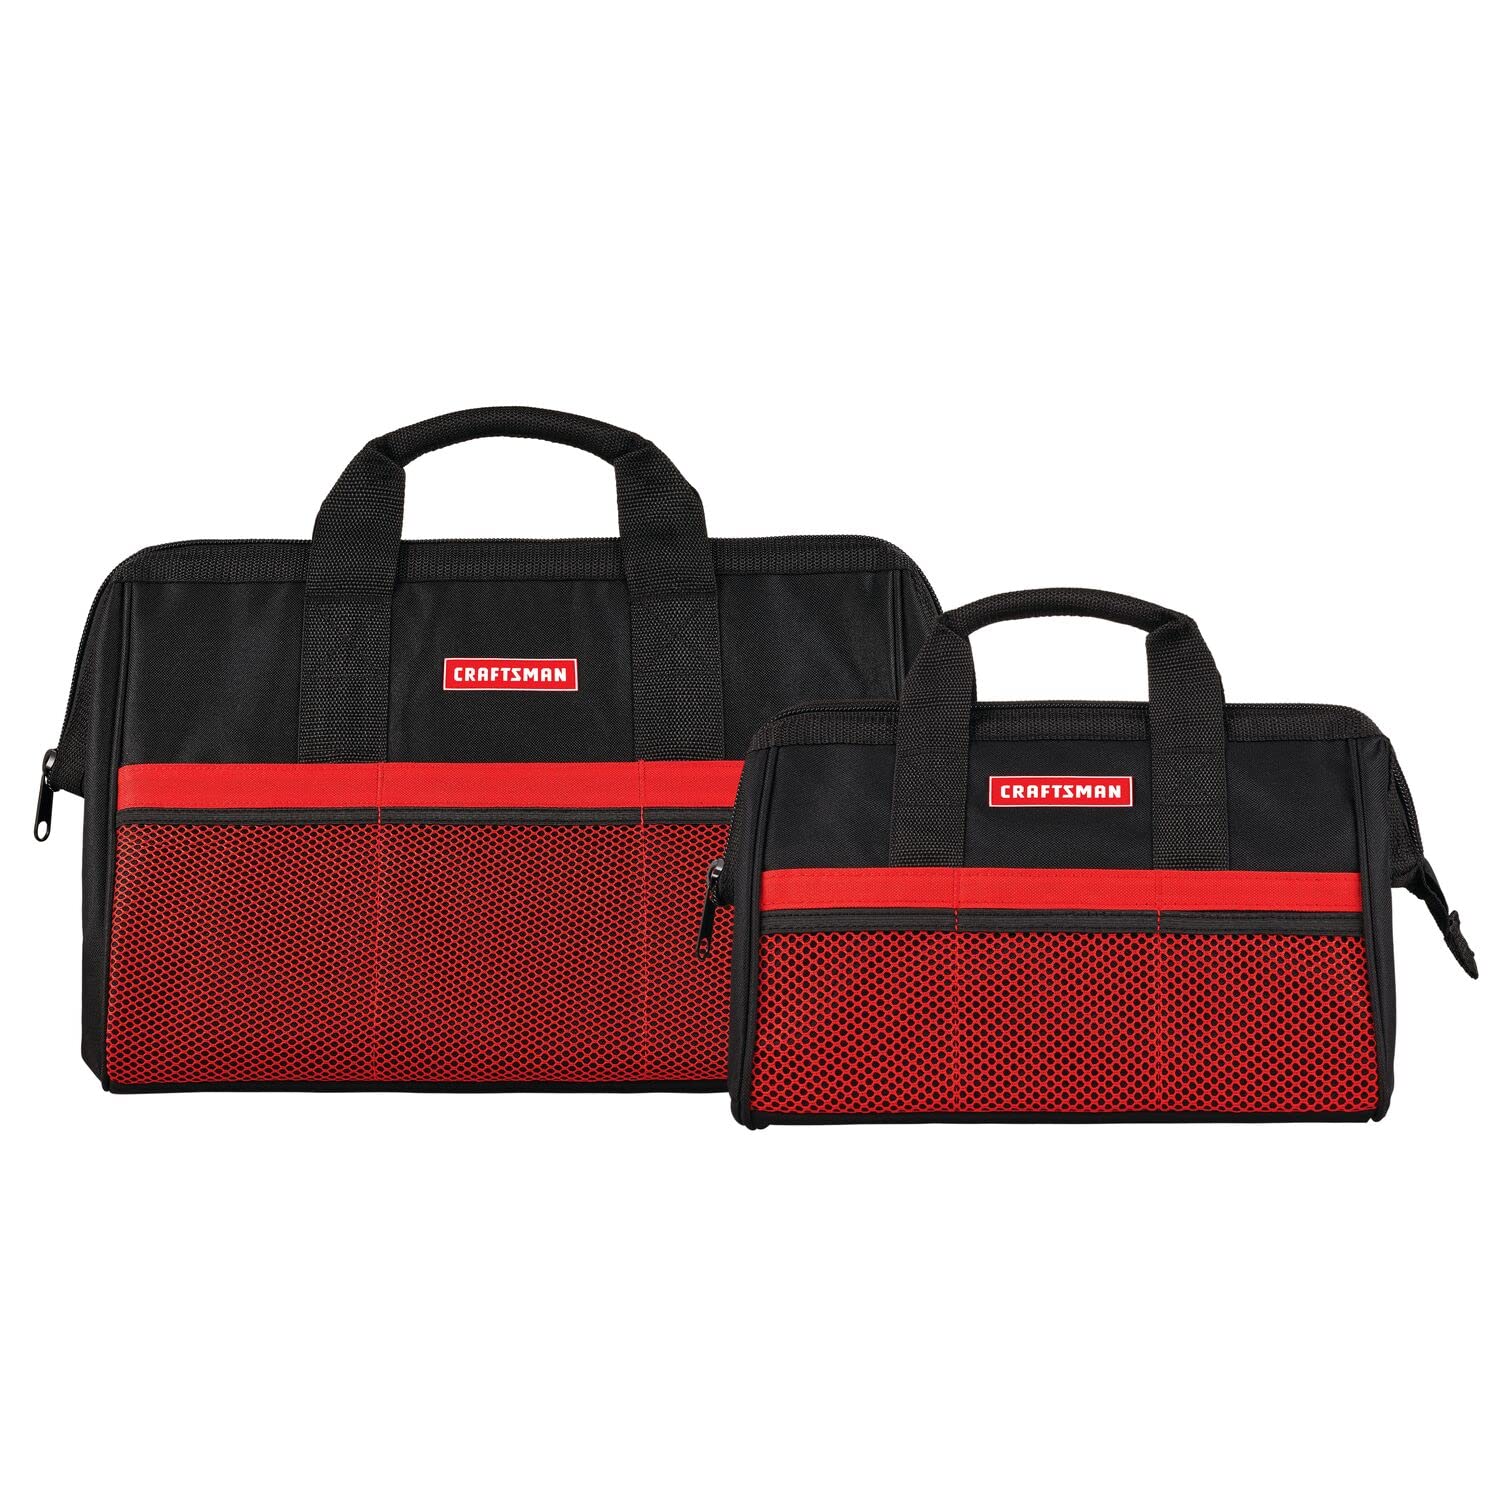 Craftsman 18" & 13" Zippered Tool Bag Combo Pack (CMST513518) $15 + Free Shipping w/ Prime or on $35+